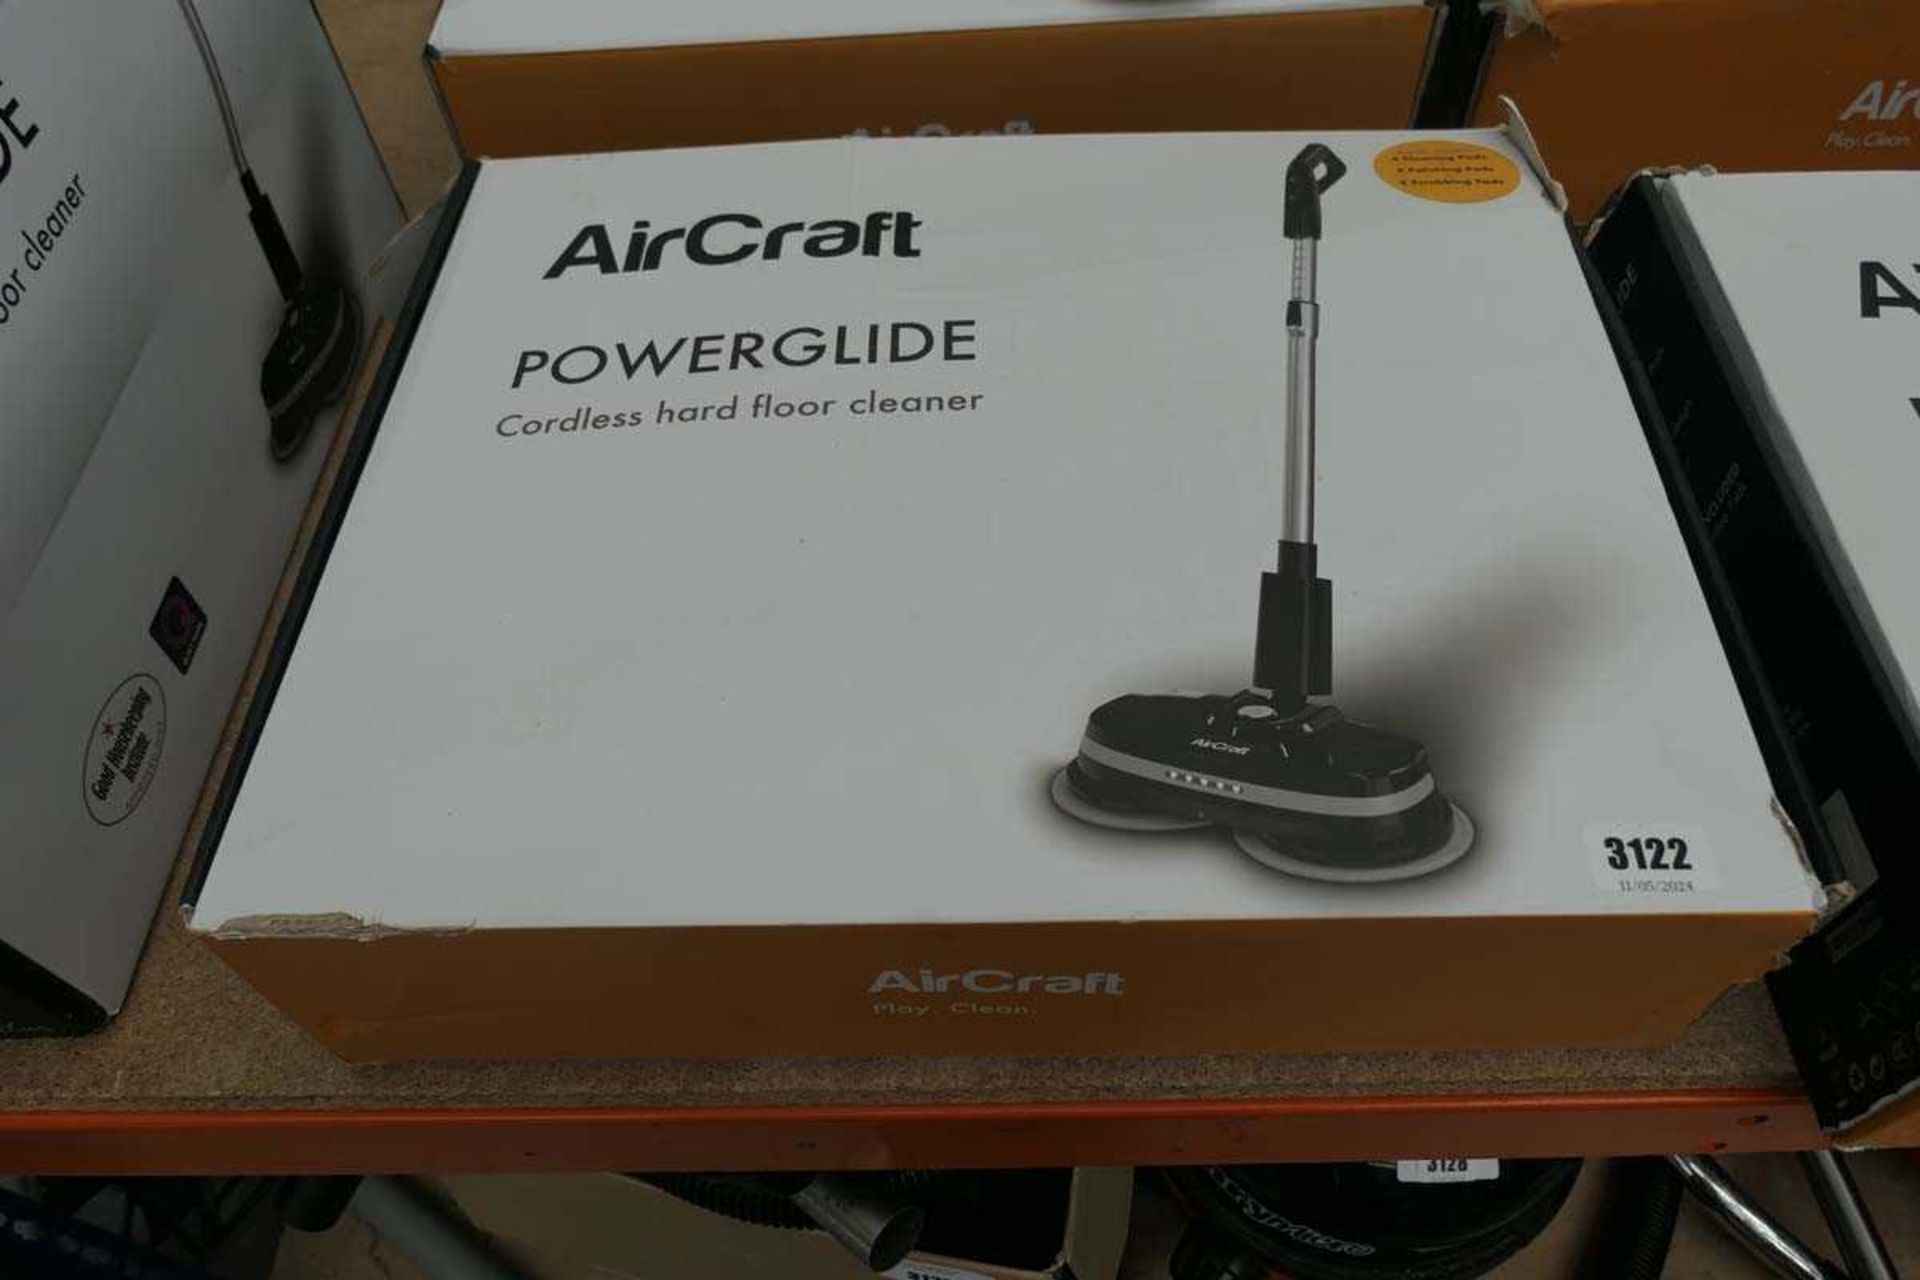 Aircraft Powerglide cordless hard floor cleaner